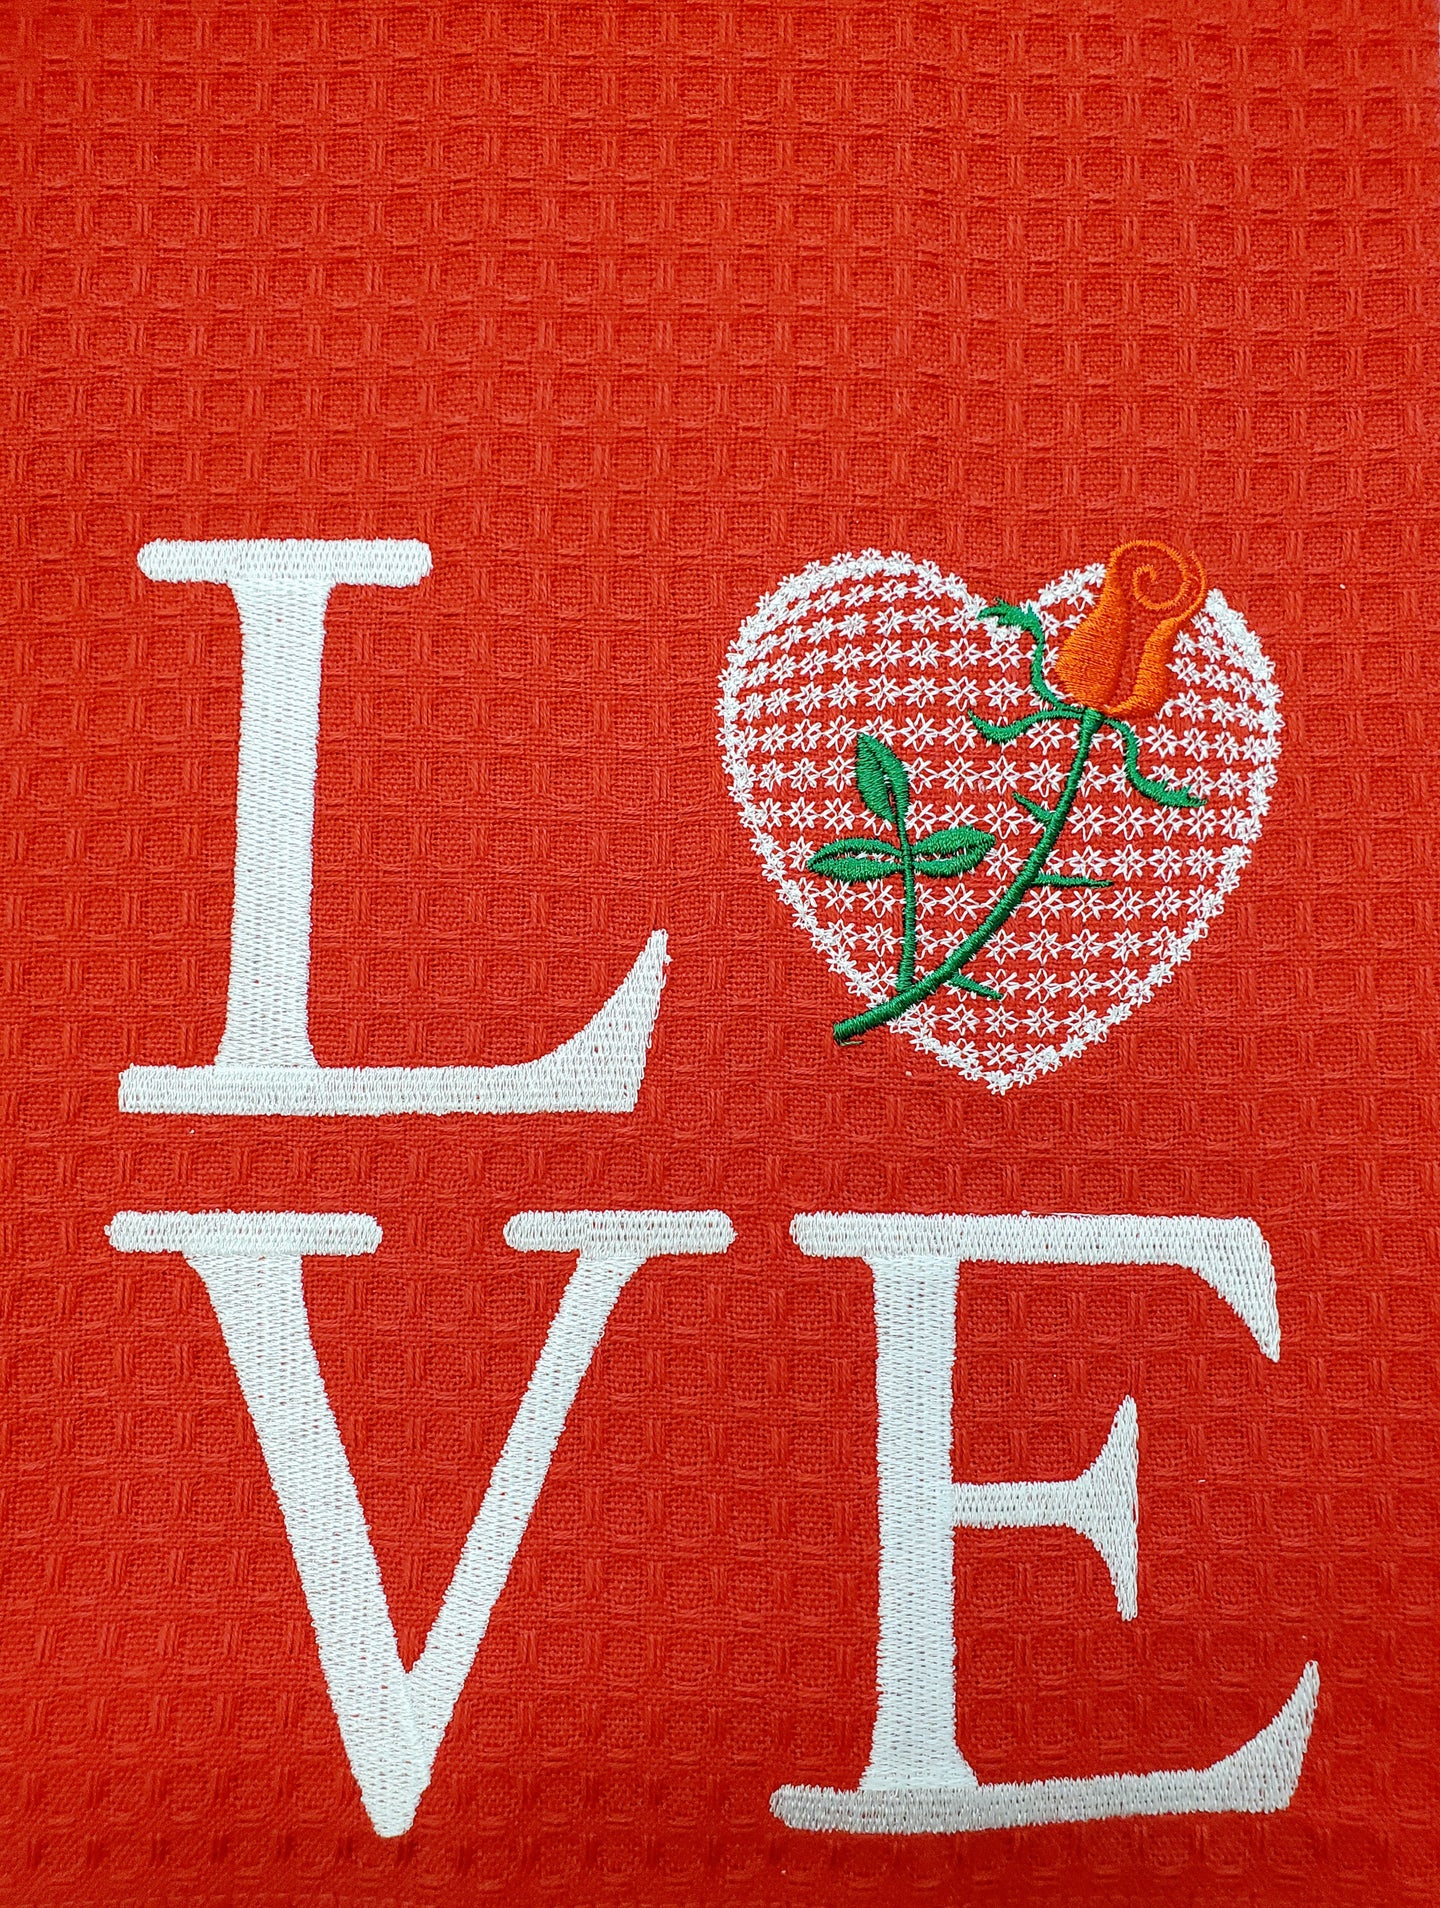 LOVE on Red Embroidered Tea Towel